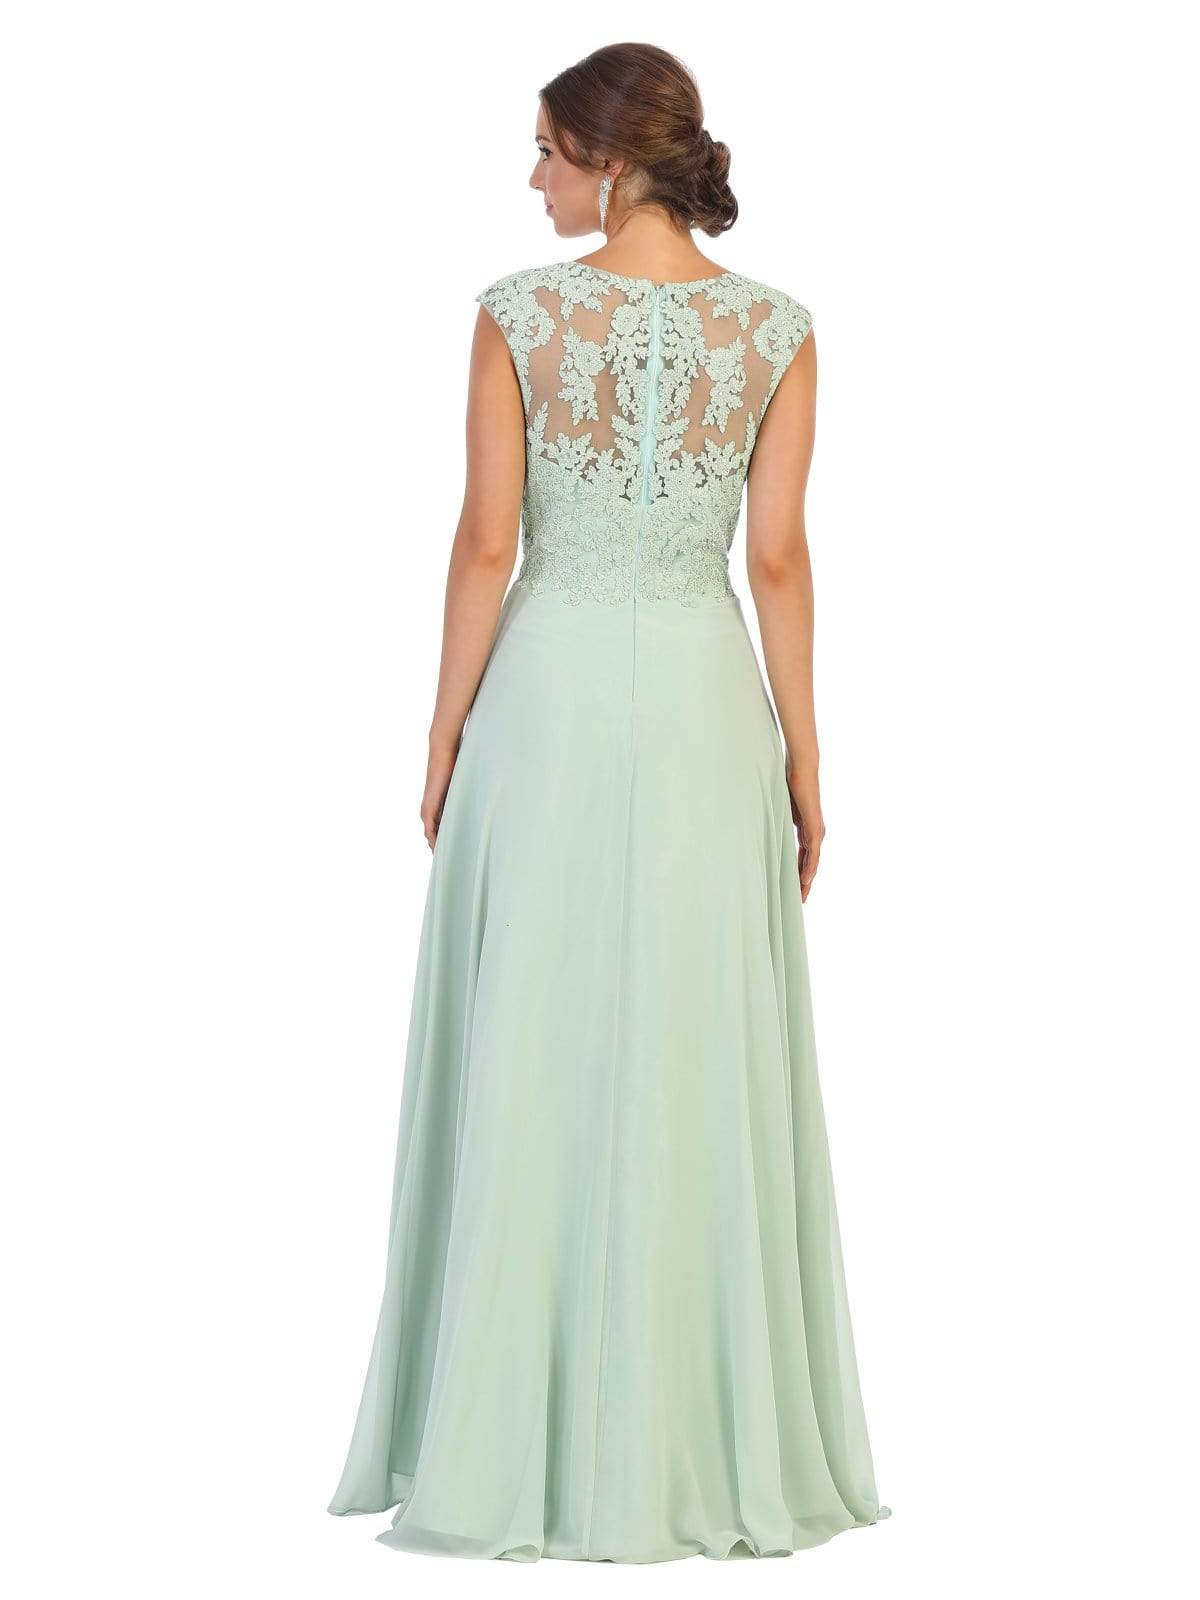 May Queen - MQ1725 Lace Bodice Chiffon A-Line Long Formal Dress Mother of the Bride Dresses